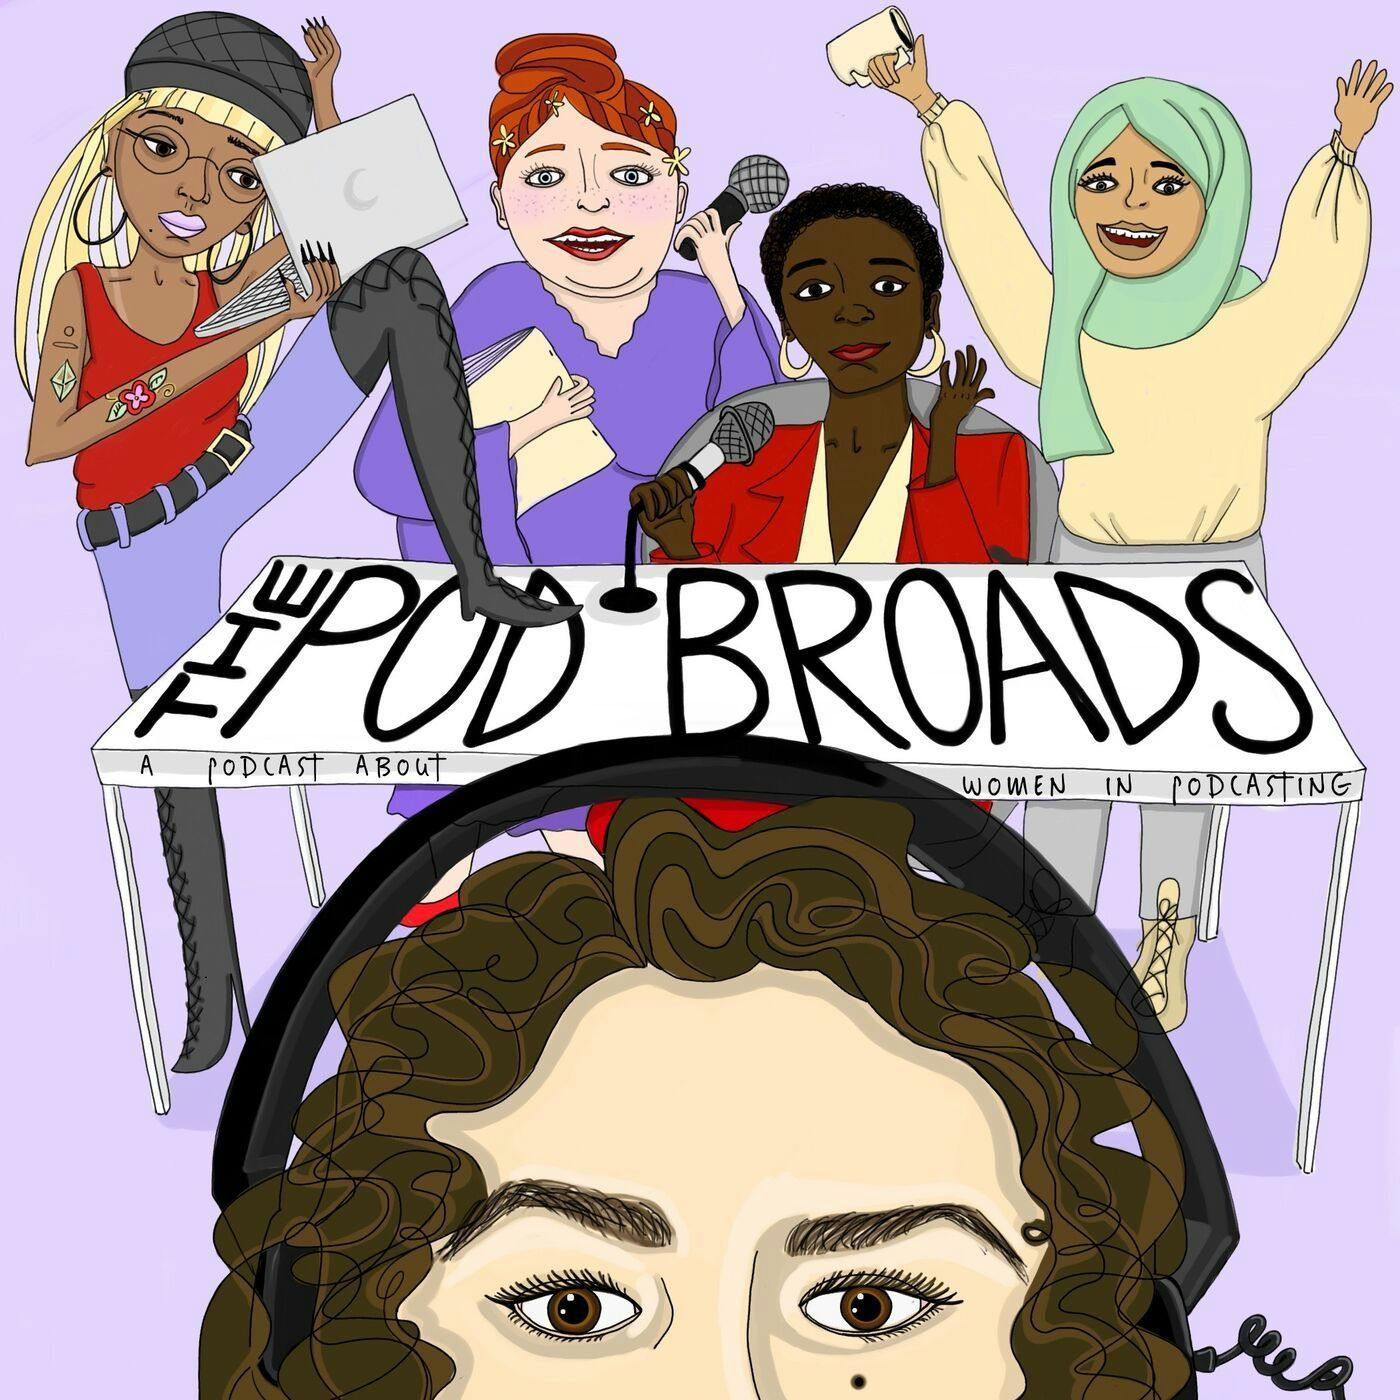 The Pod Broads: A Podcast About Women in Podcasting